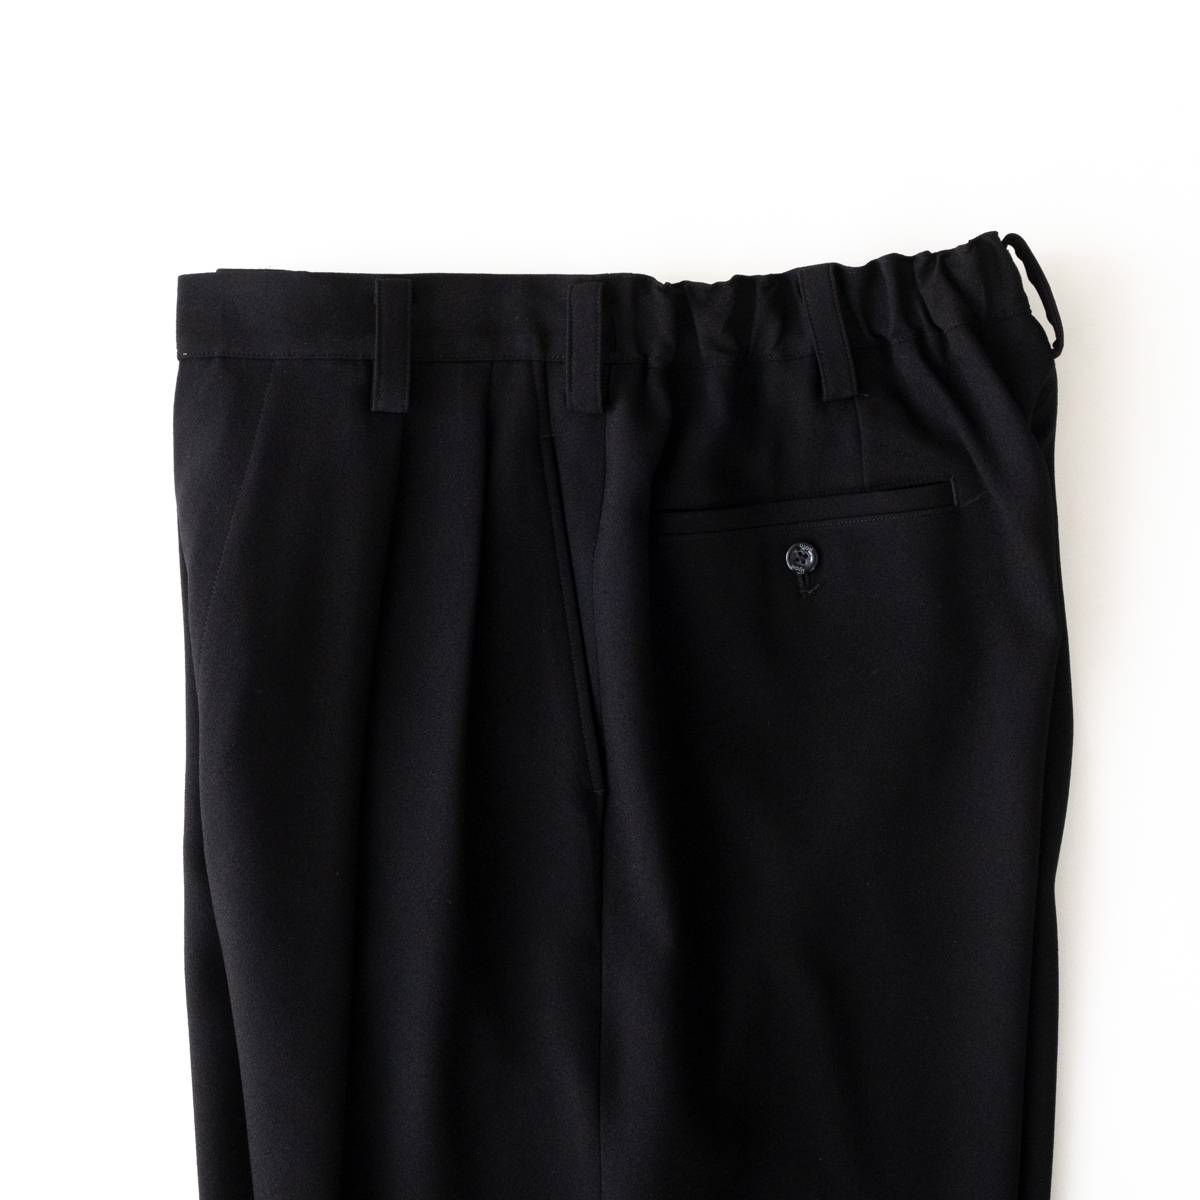 UJOH Wide 2Tuck PNT(Black) | UJOH (ウジョー) - 通販 - FEEL EASY 